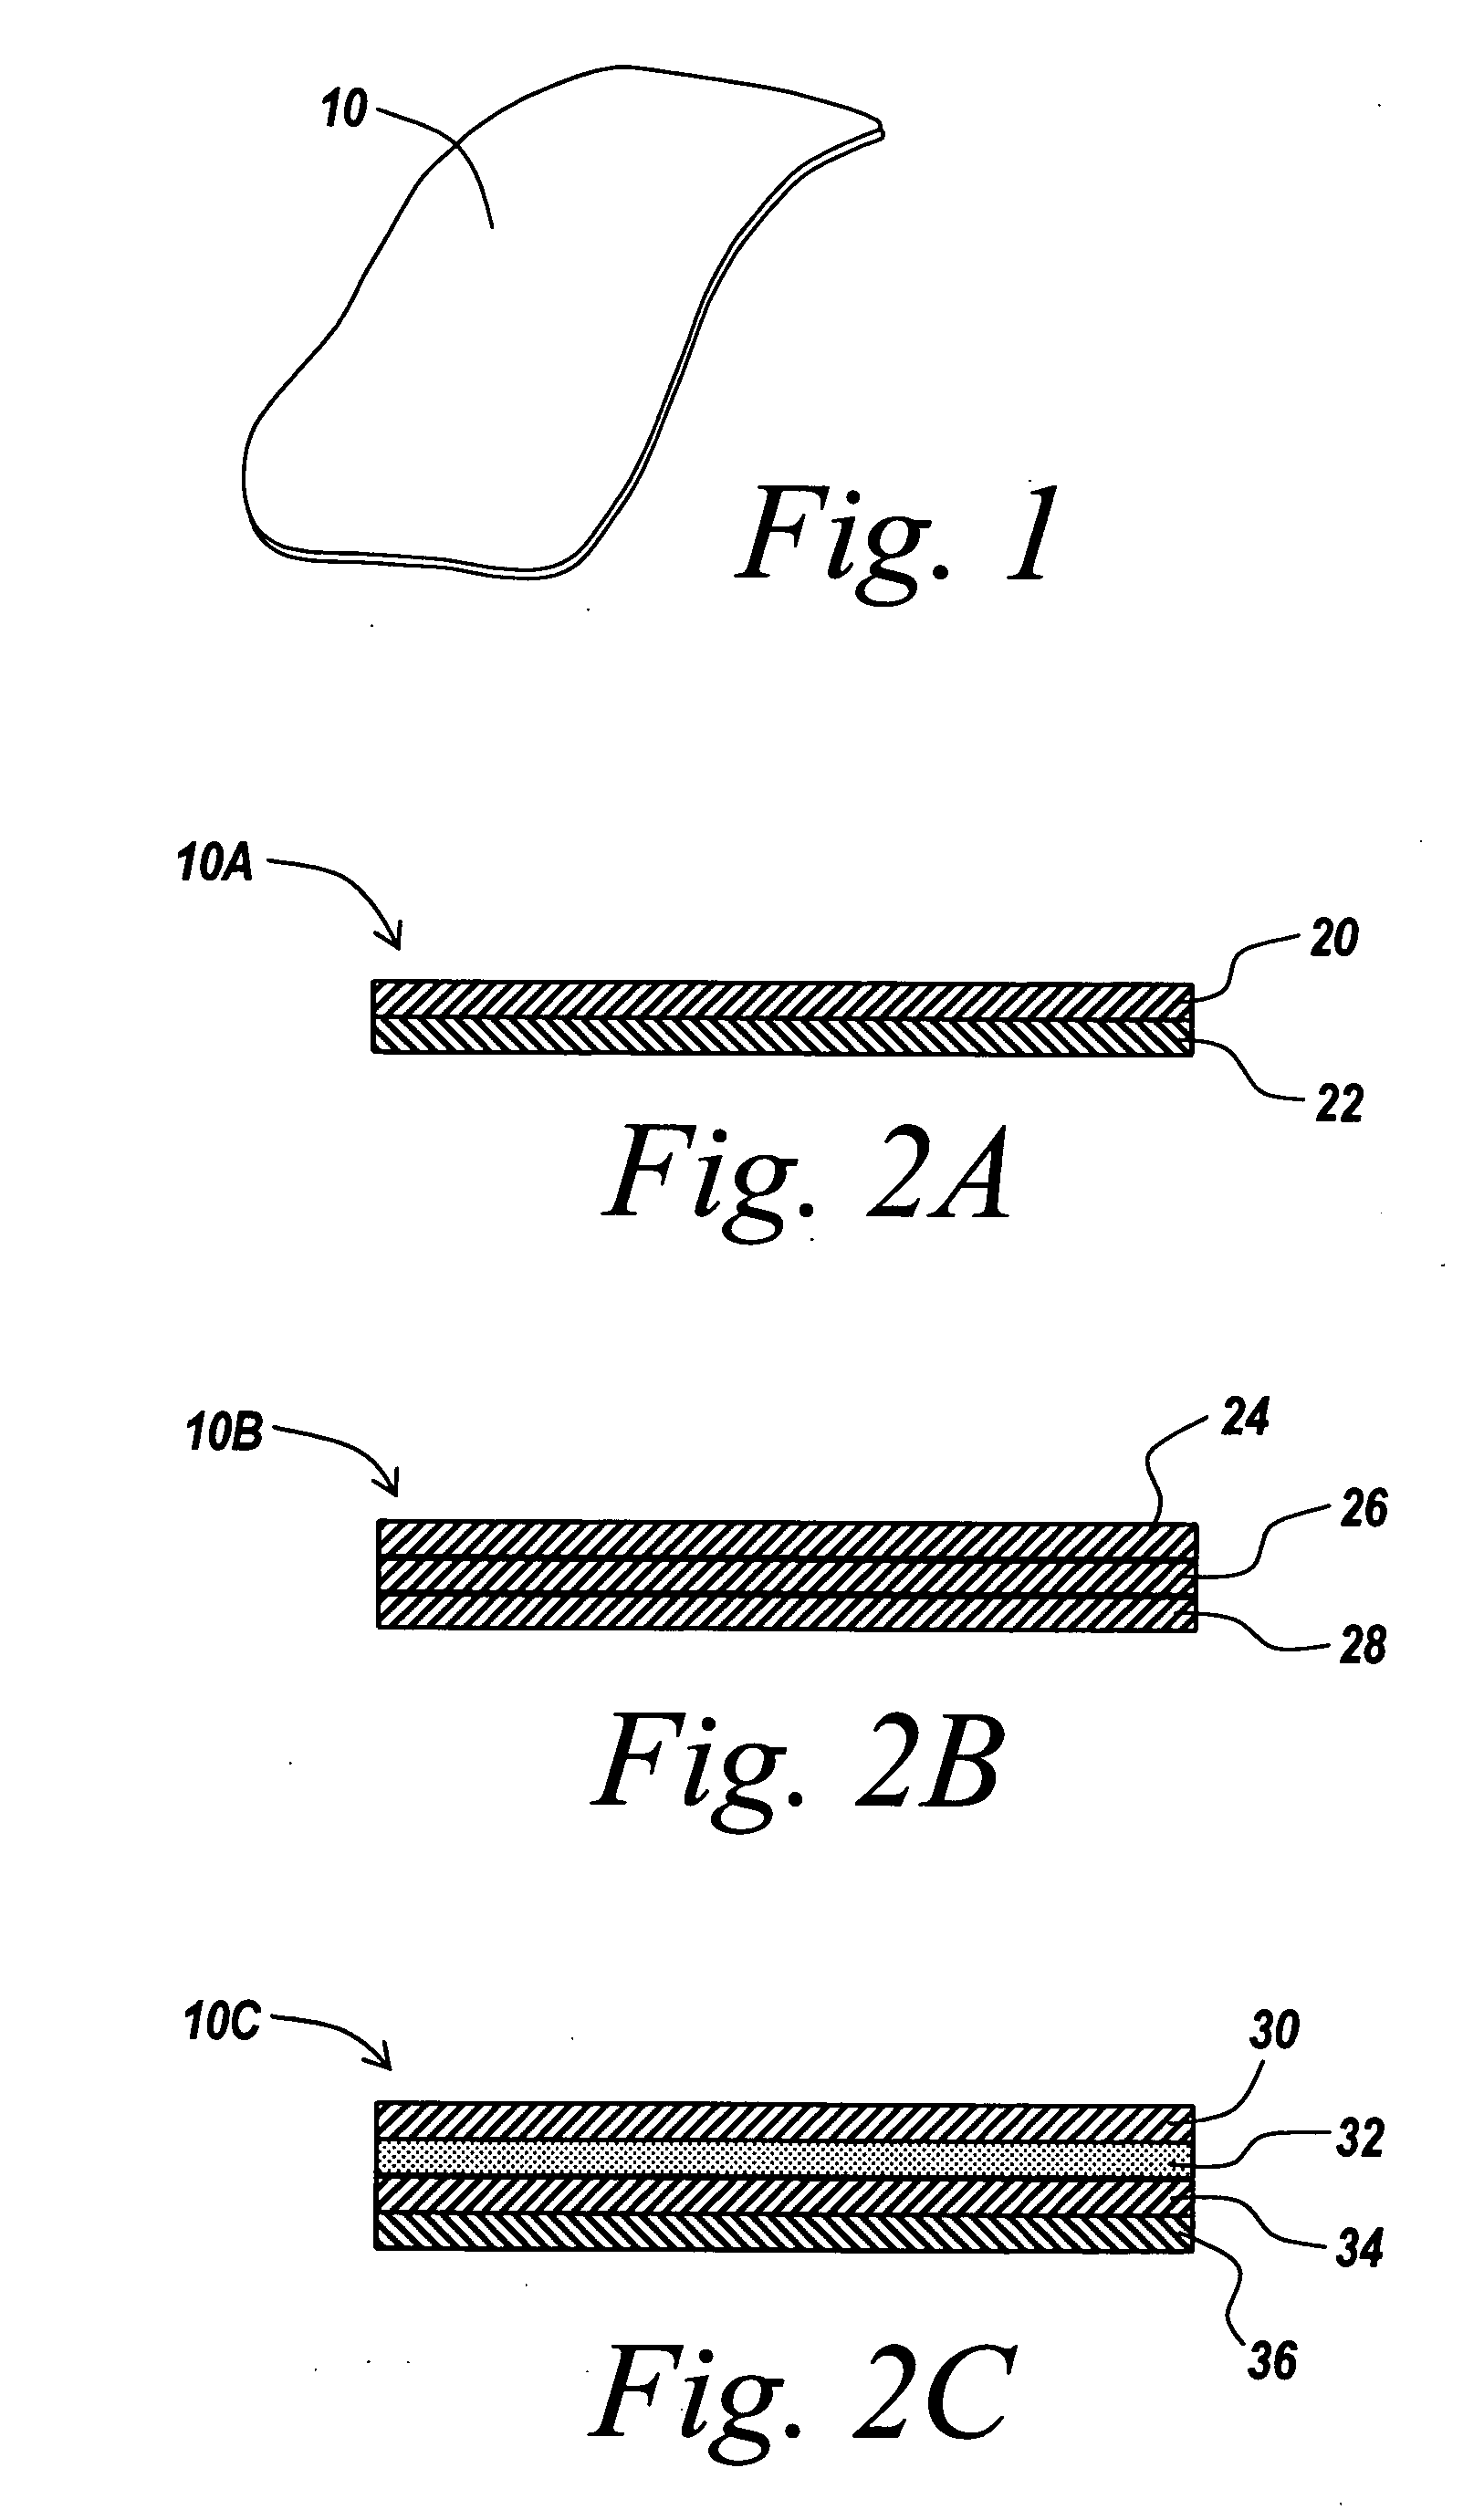 Formation of barrier layer